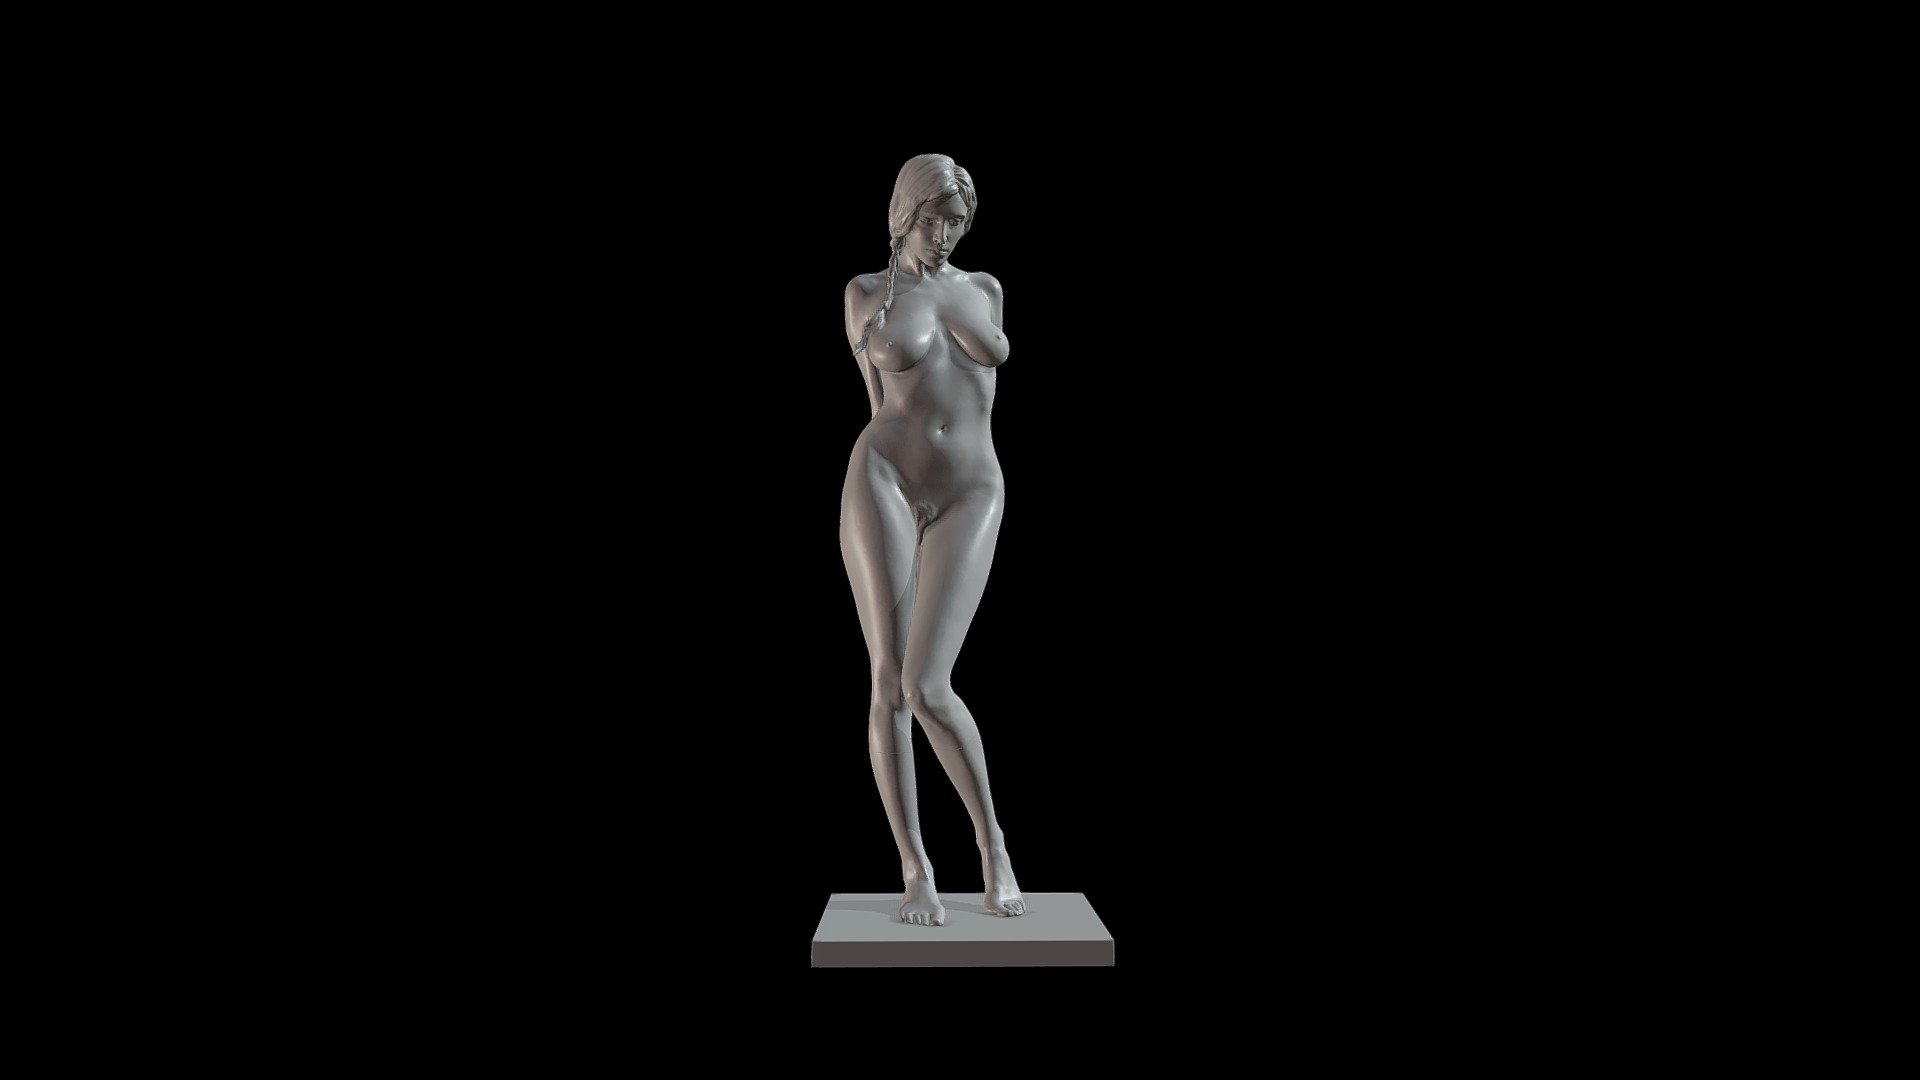 Coline 162- Figurine version

Meet Our Beautiful and Shy Model

Other models and poses at another-gallery

This model has been scanned by  another-me.fr - Coline 162 - Figurine - 3D model by Another-me (@fredlucazeau) 3d model